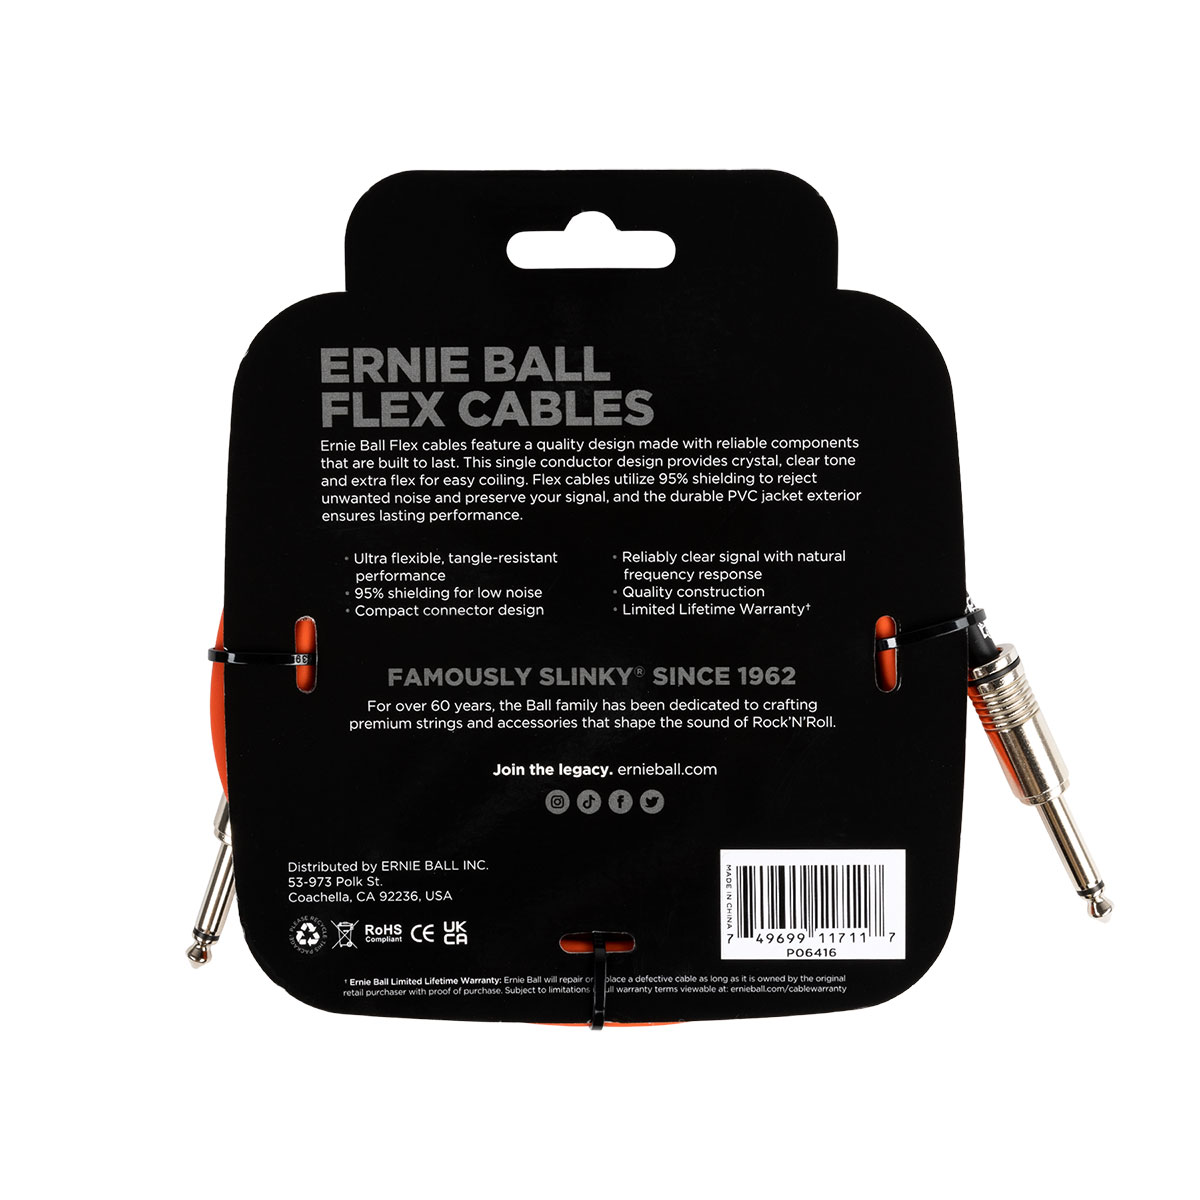 ERNiE BALL FLEX CABLE 10' SS OR フレックスケーブル 約3m オレンジ アーニーボール P06416